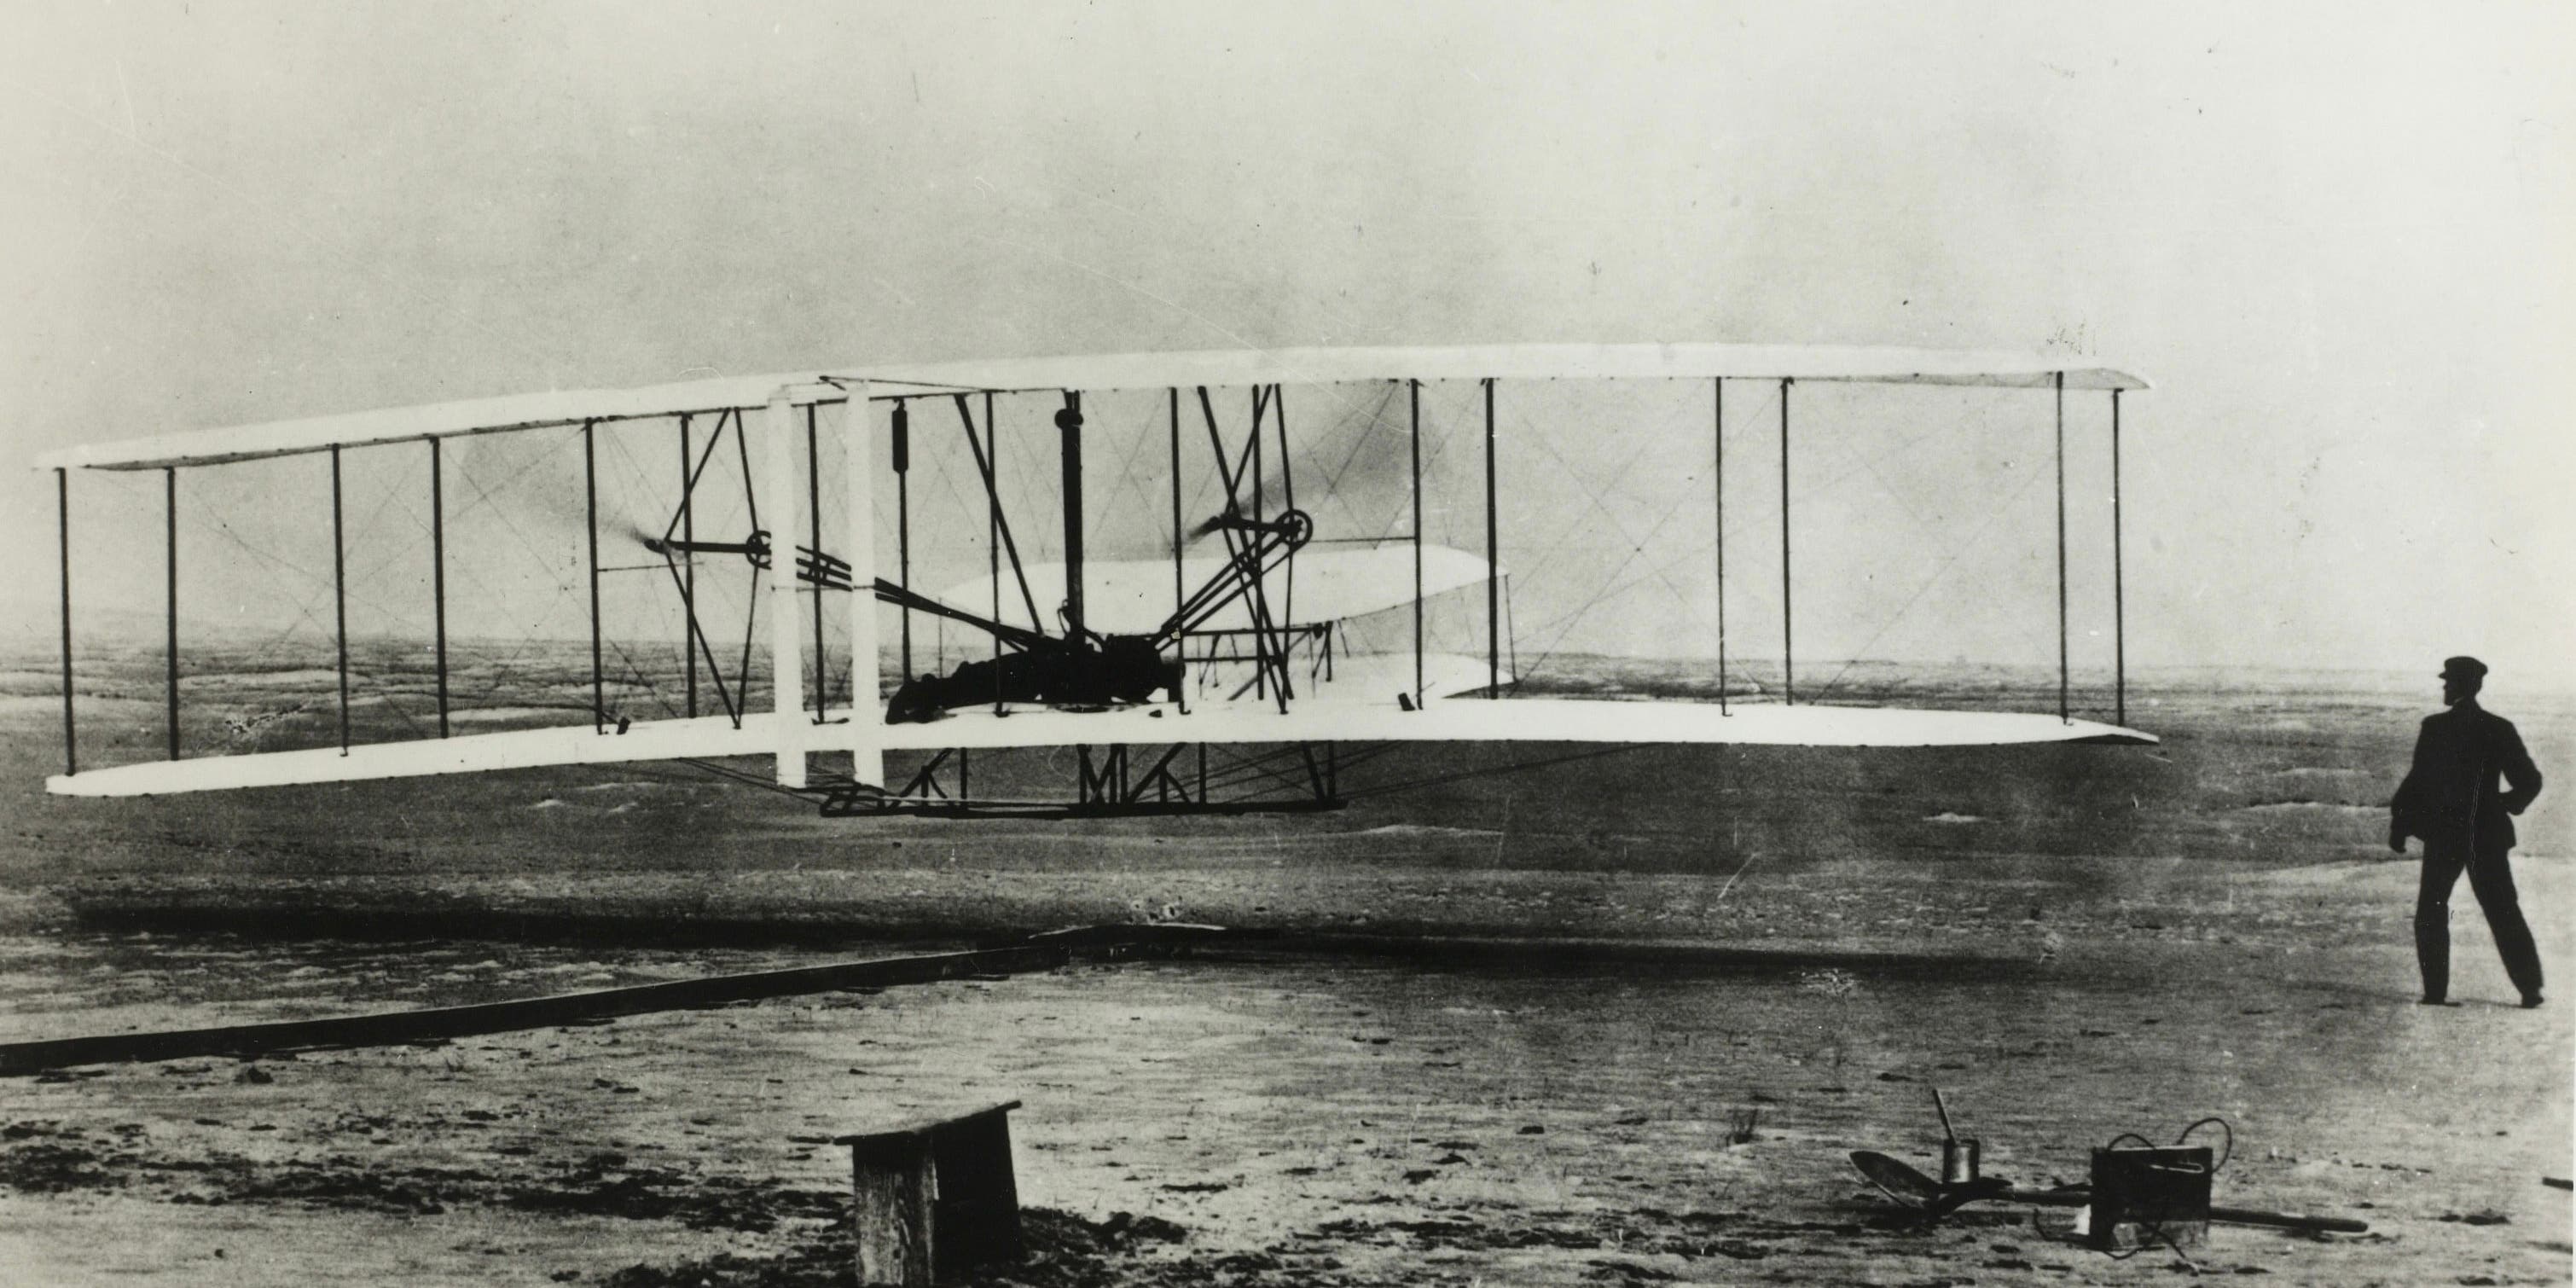 December 17th, 1903, Kittyhawk, North Carolina: The World's first flight with Orville Wright at the controls. His brother Wilbur is running at the side of the machine.